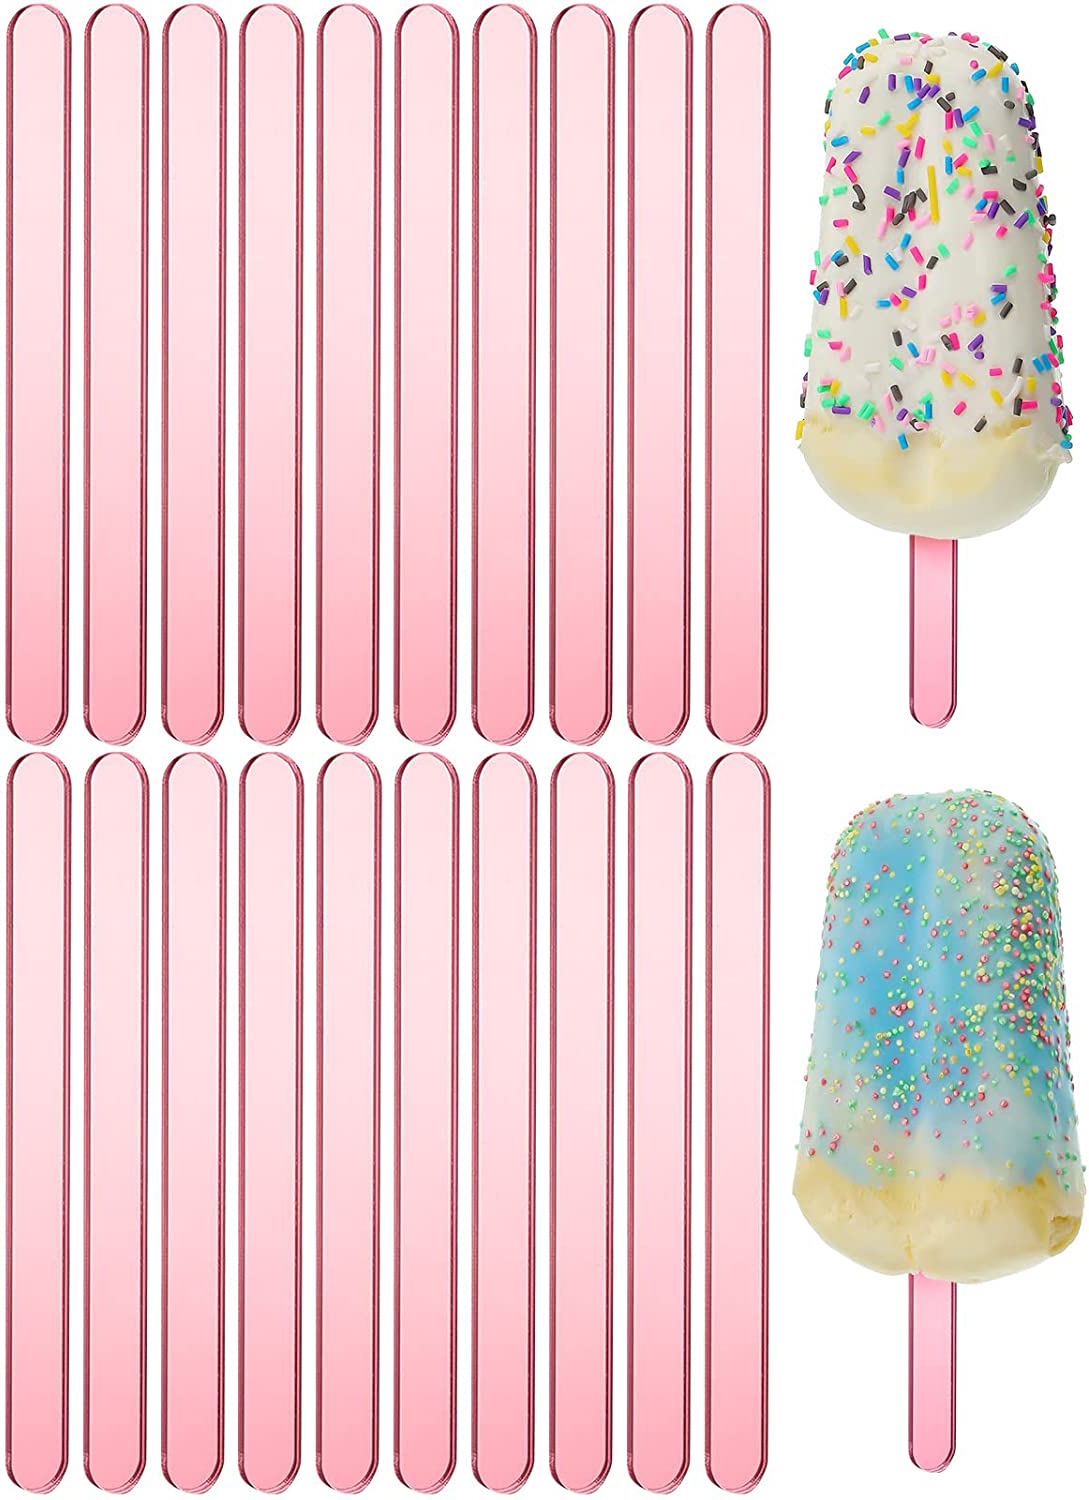 NOGIS 20 Pieces Acrylic Cakesicle Sticks 4.5 Inch Reusable Ice Cream Sticks  Mirror Ice Cream Sticks Mini Acrylic Craft Ice Cream Sticks for Candy Ice